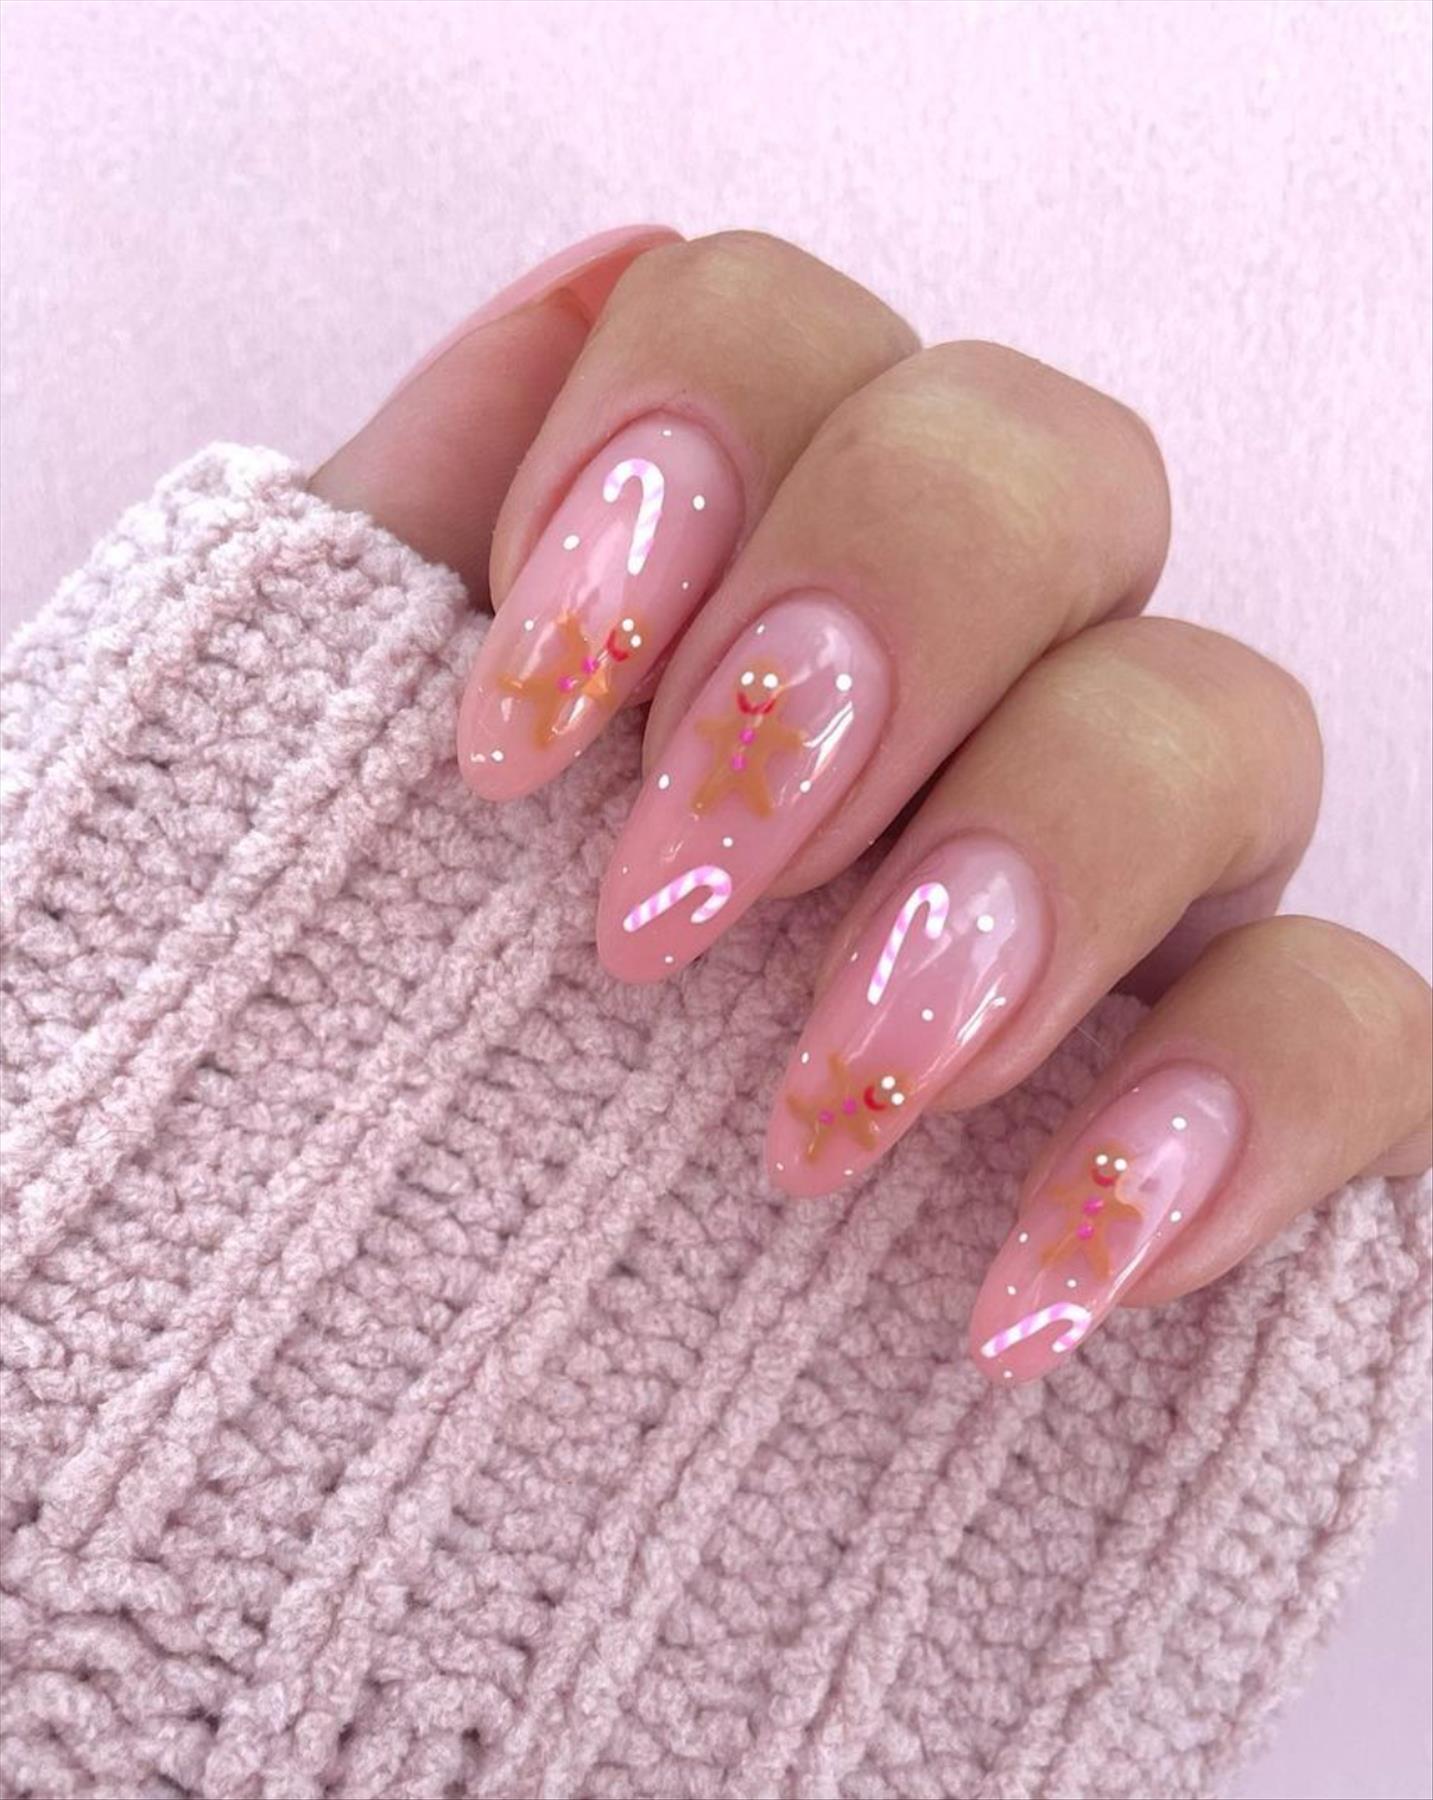 Best Christmas nail design ideas 2021 to try